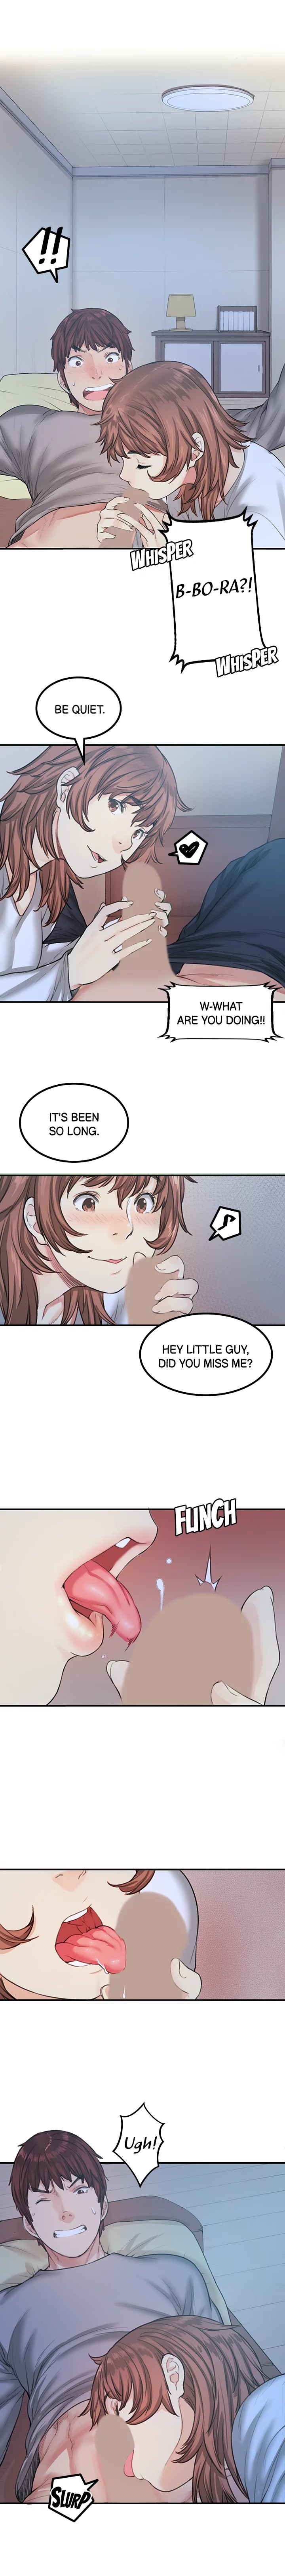 My Best Friend’s Girl - Chapter 24 Page 6